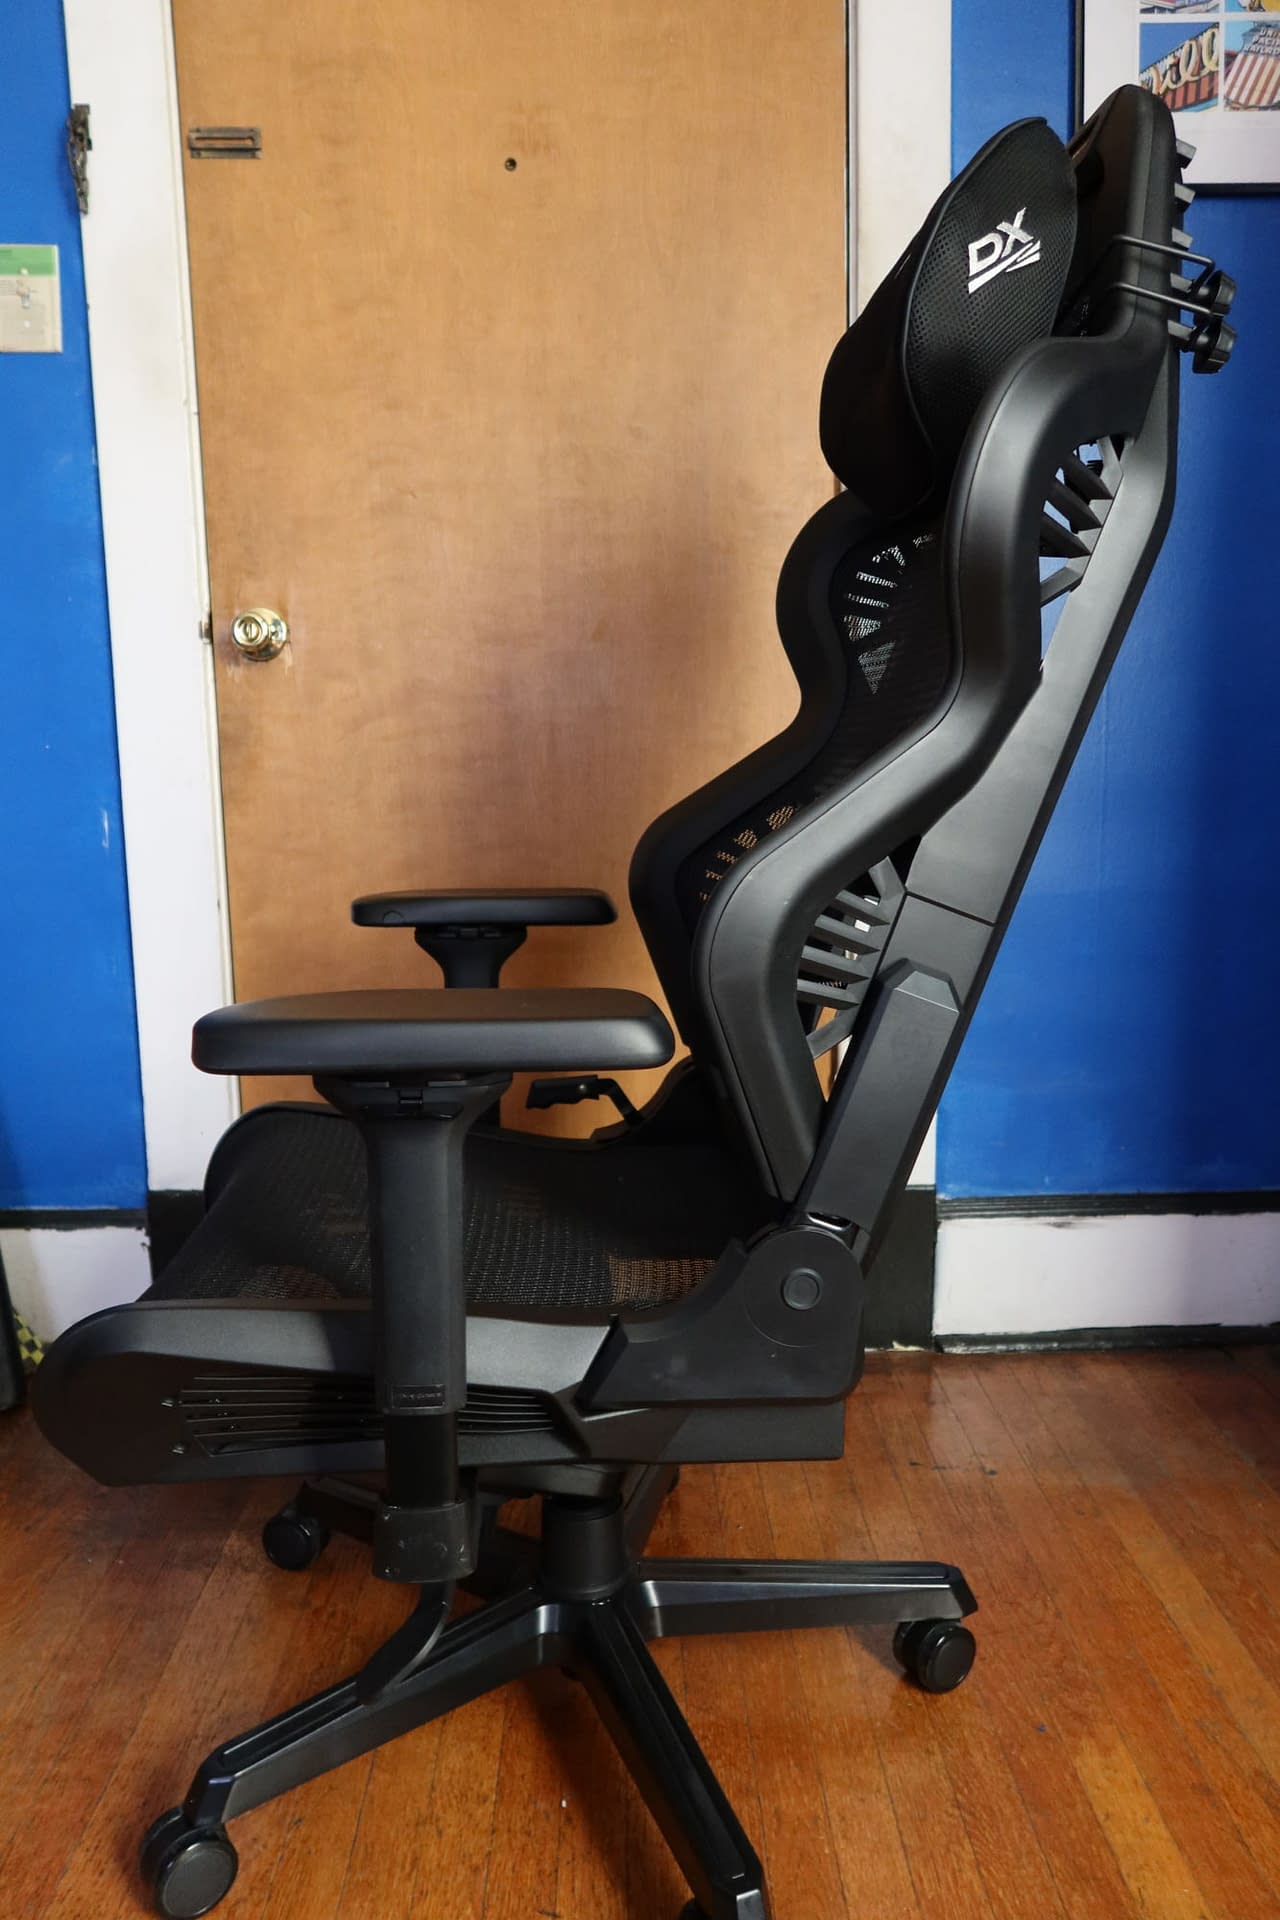 We Review The DXRacer Air Mesh Gaming Chair